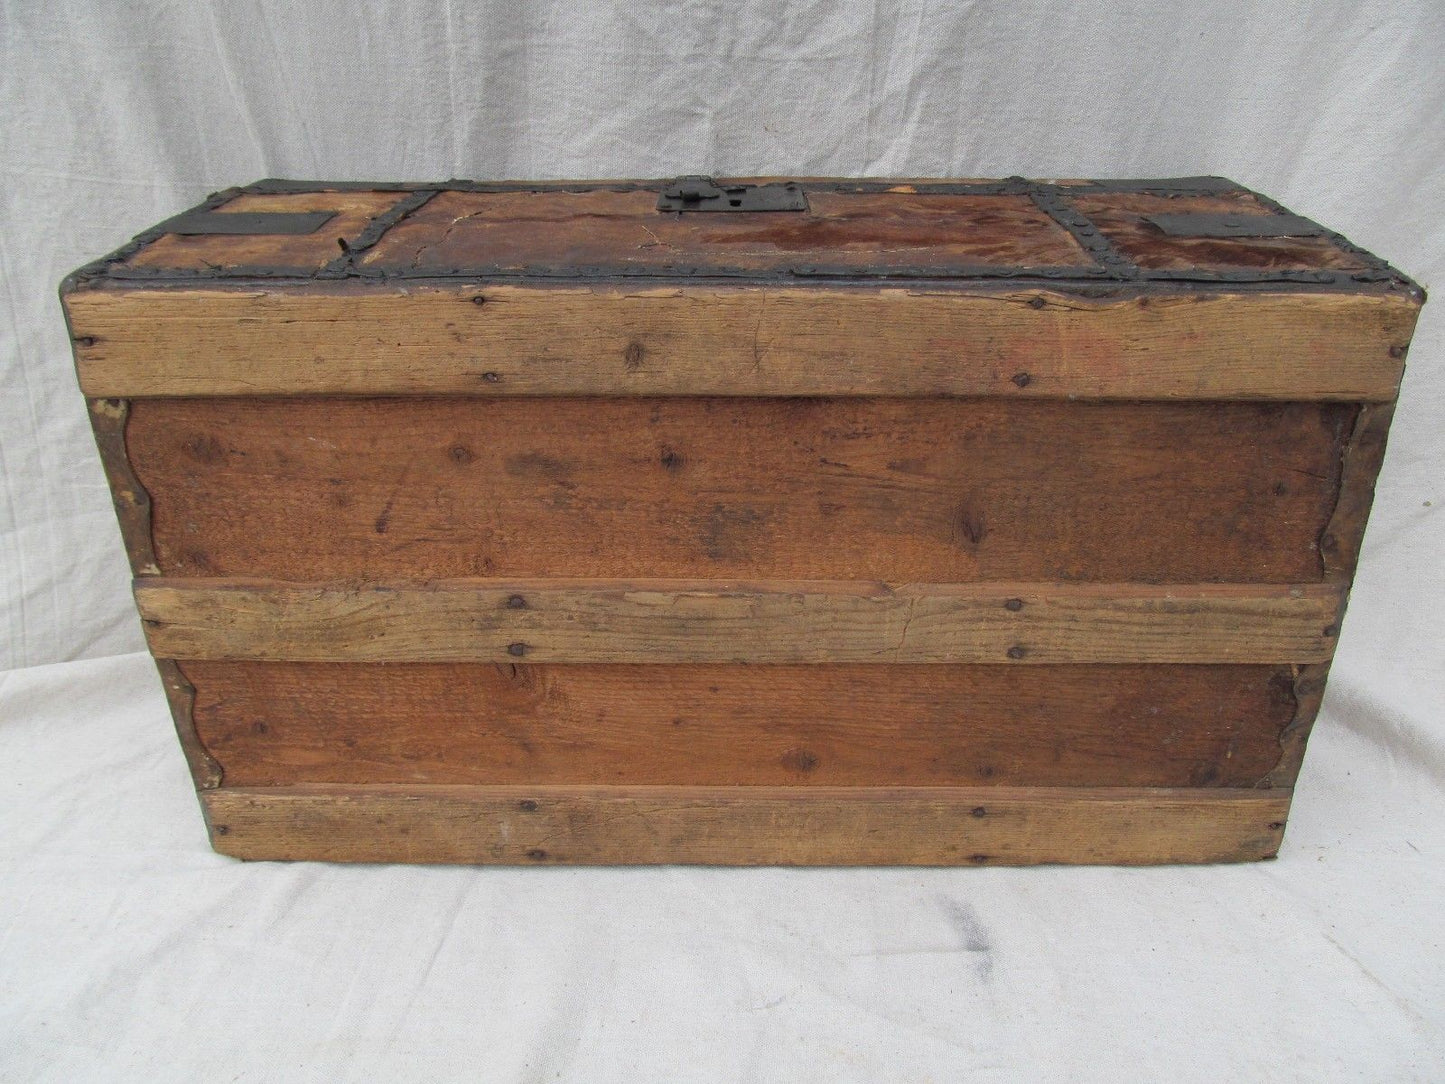 EARLY 19TH CENTURY LEATHER & HYDE COVERED STAGECOACH TRUNK